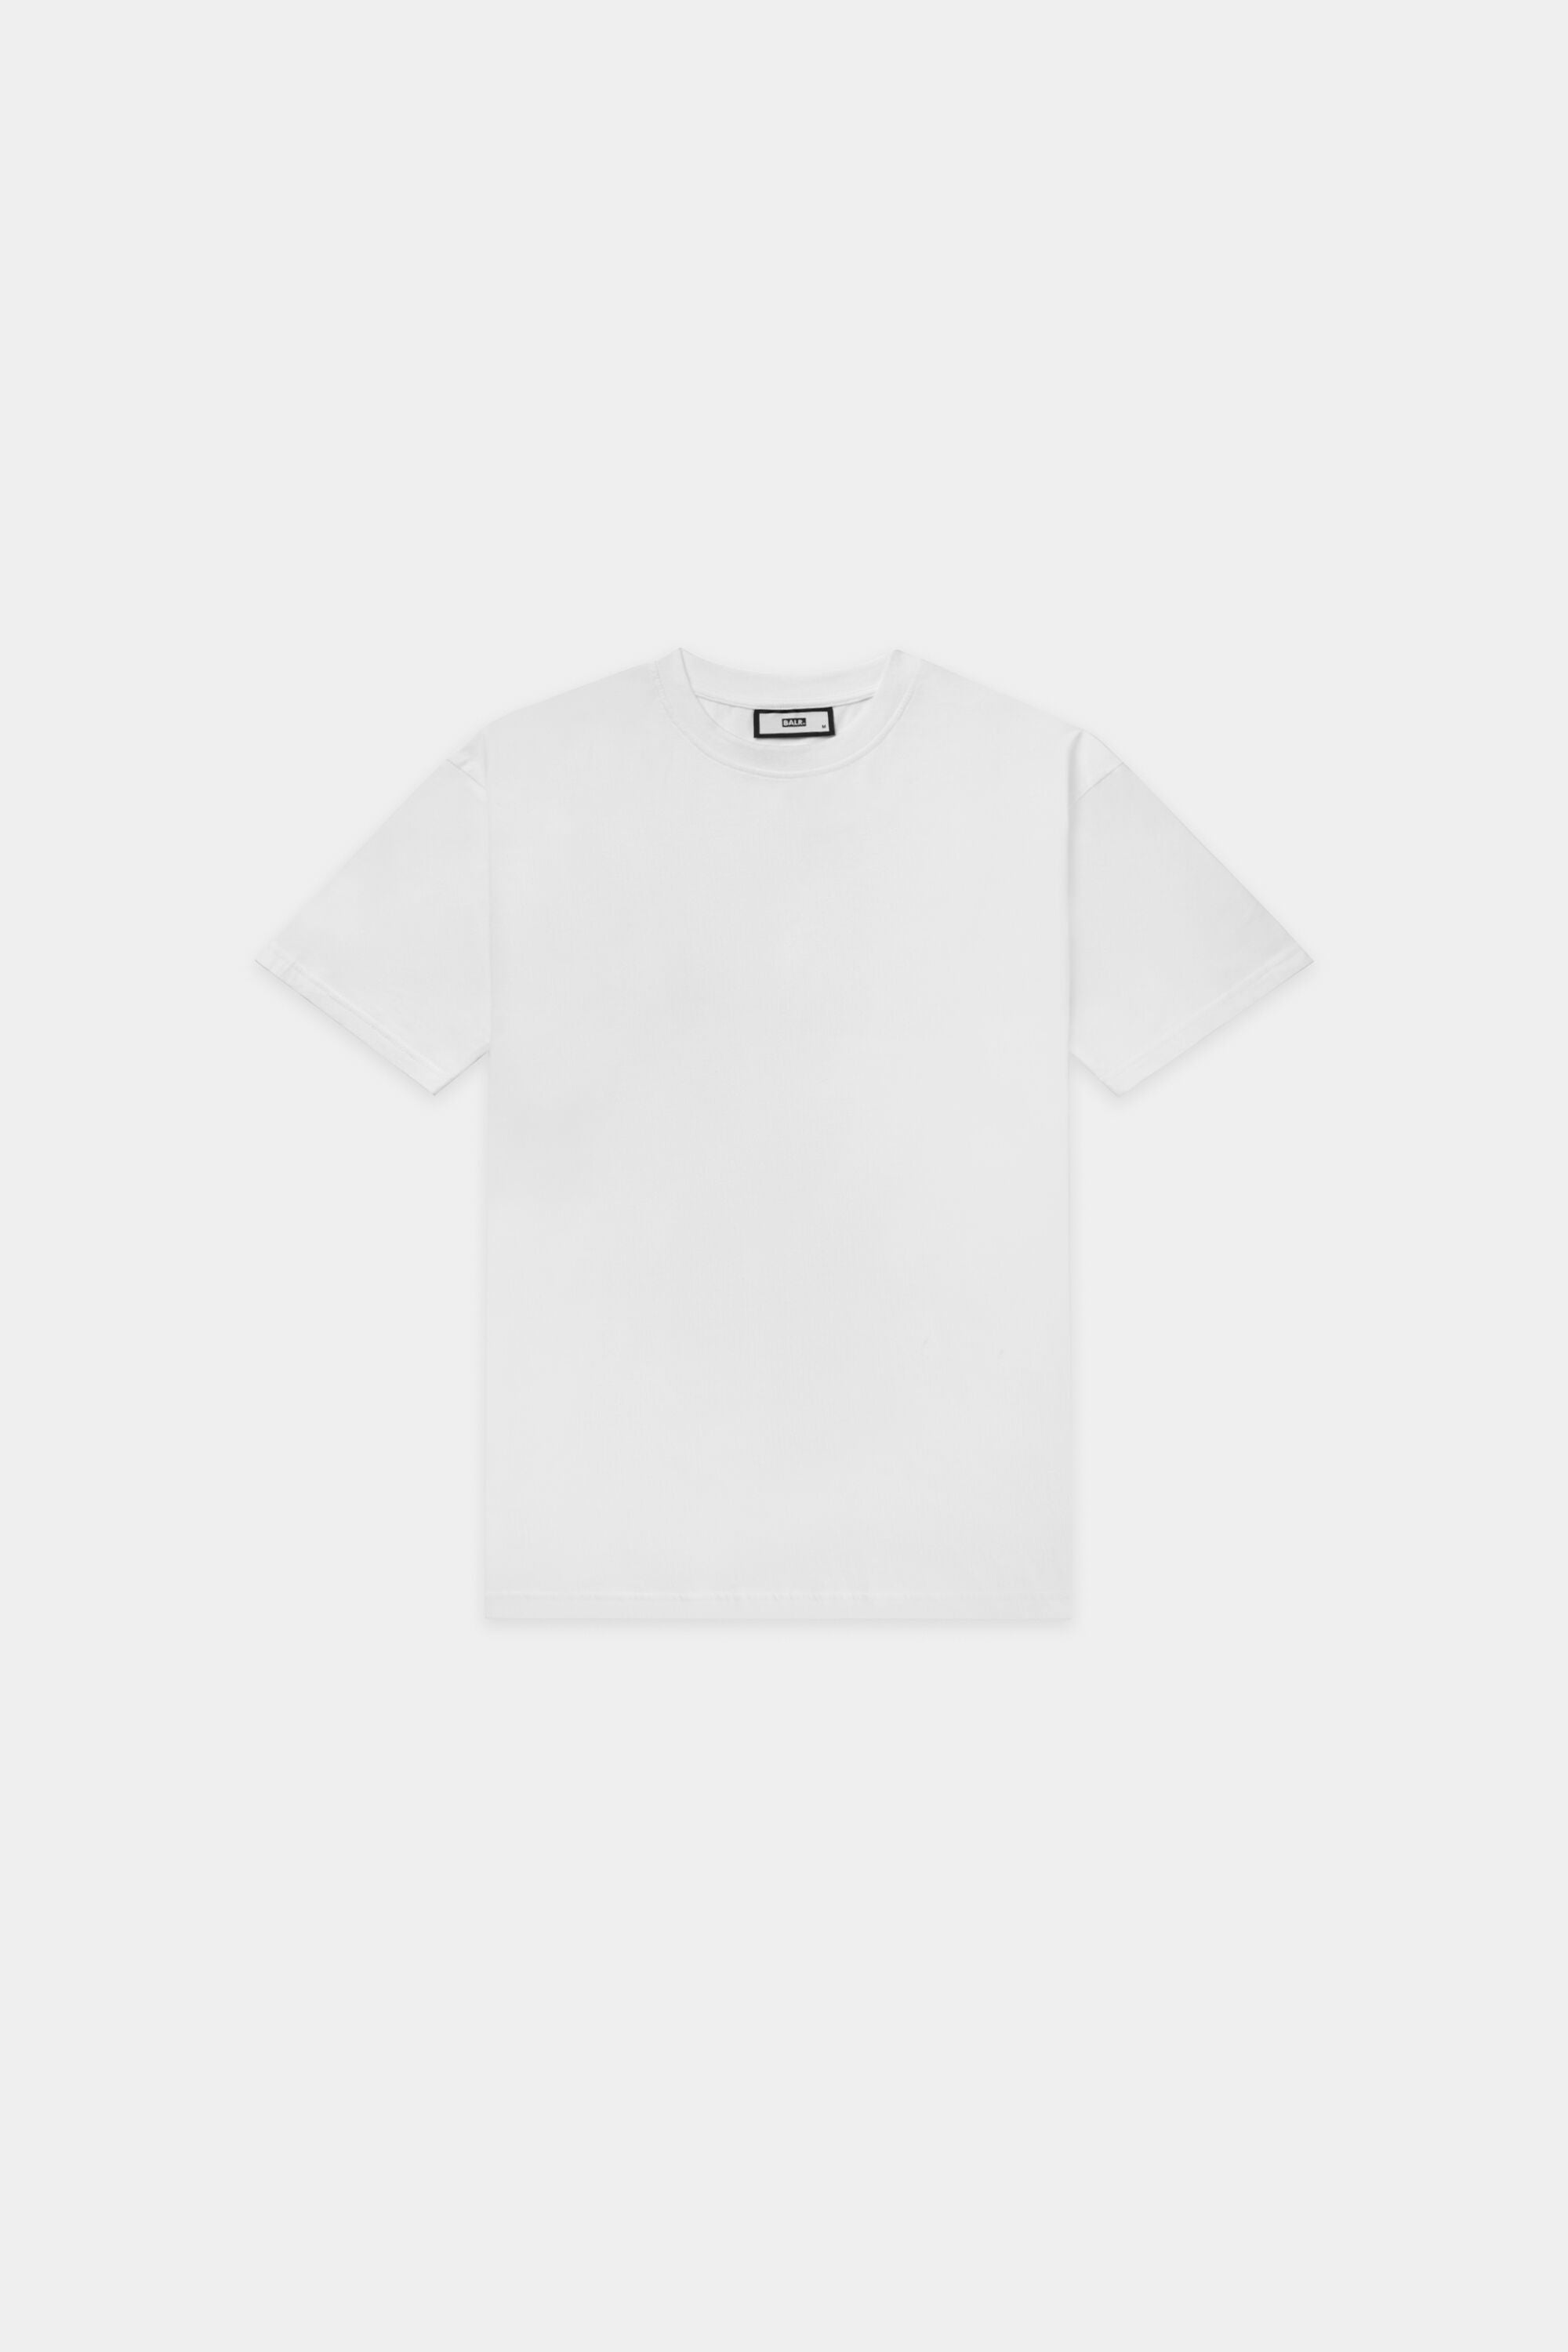 Game Day Box Fit T-Shirt Bright White